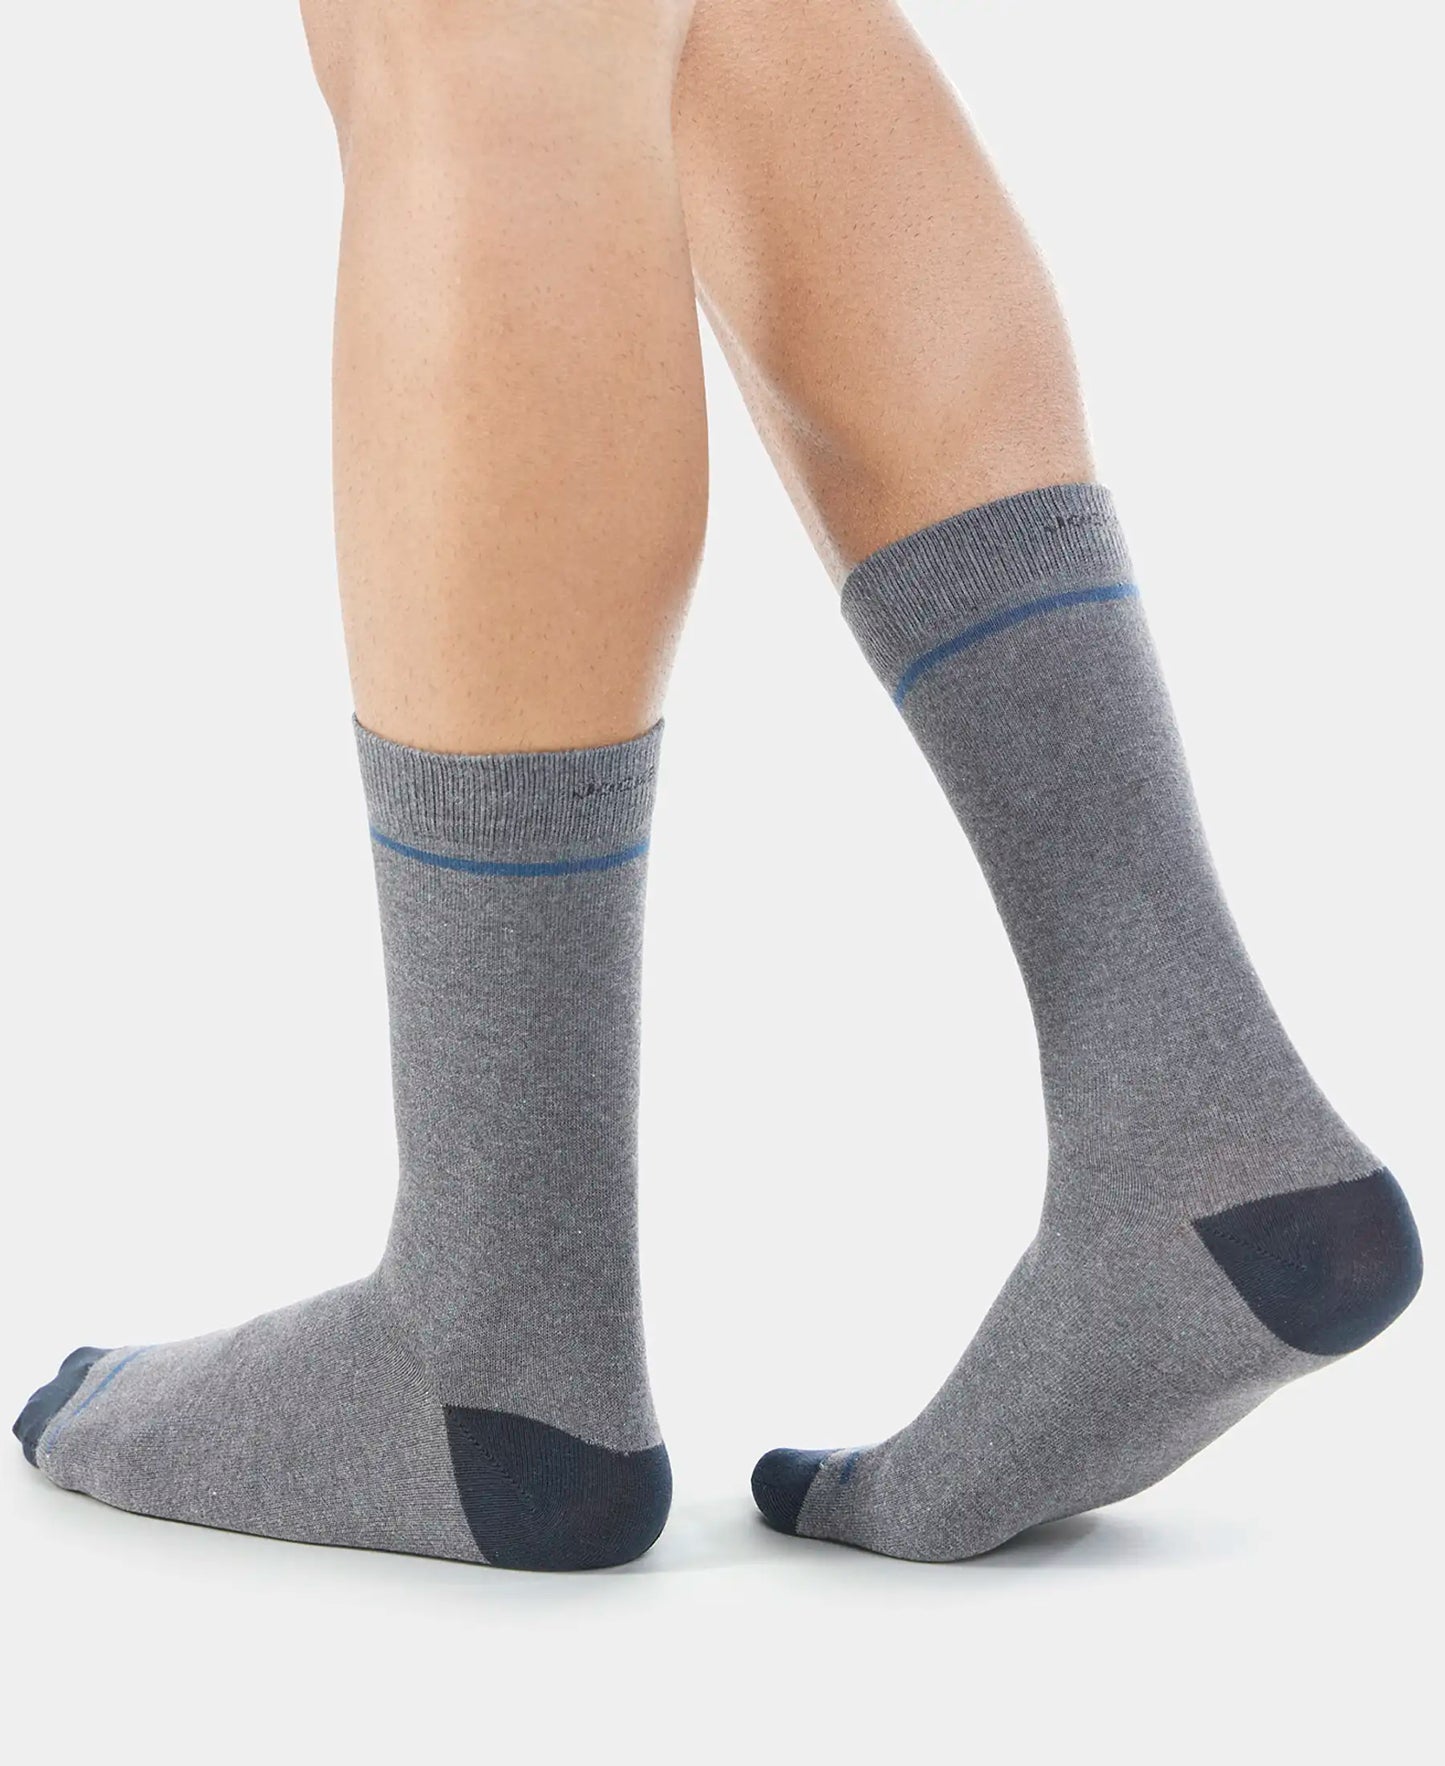 Compact Cotton Crew Length Socks with StayFresh Treatment - Charcoal Melange-12